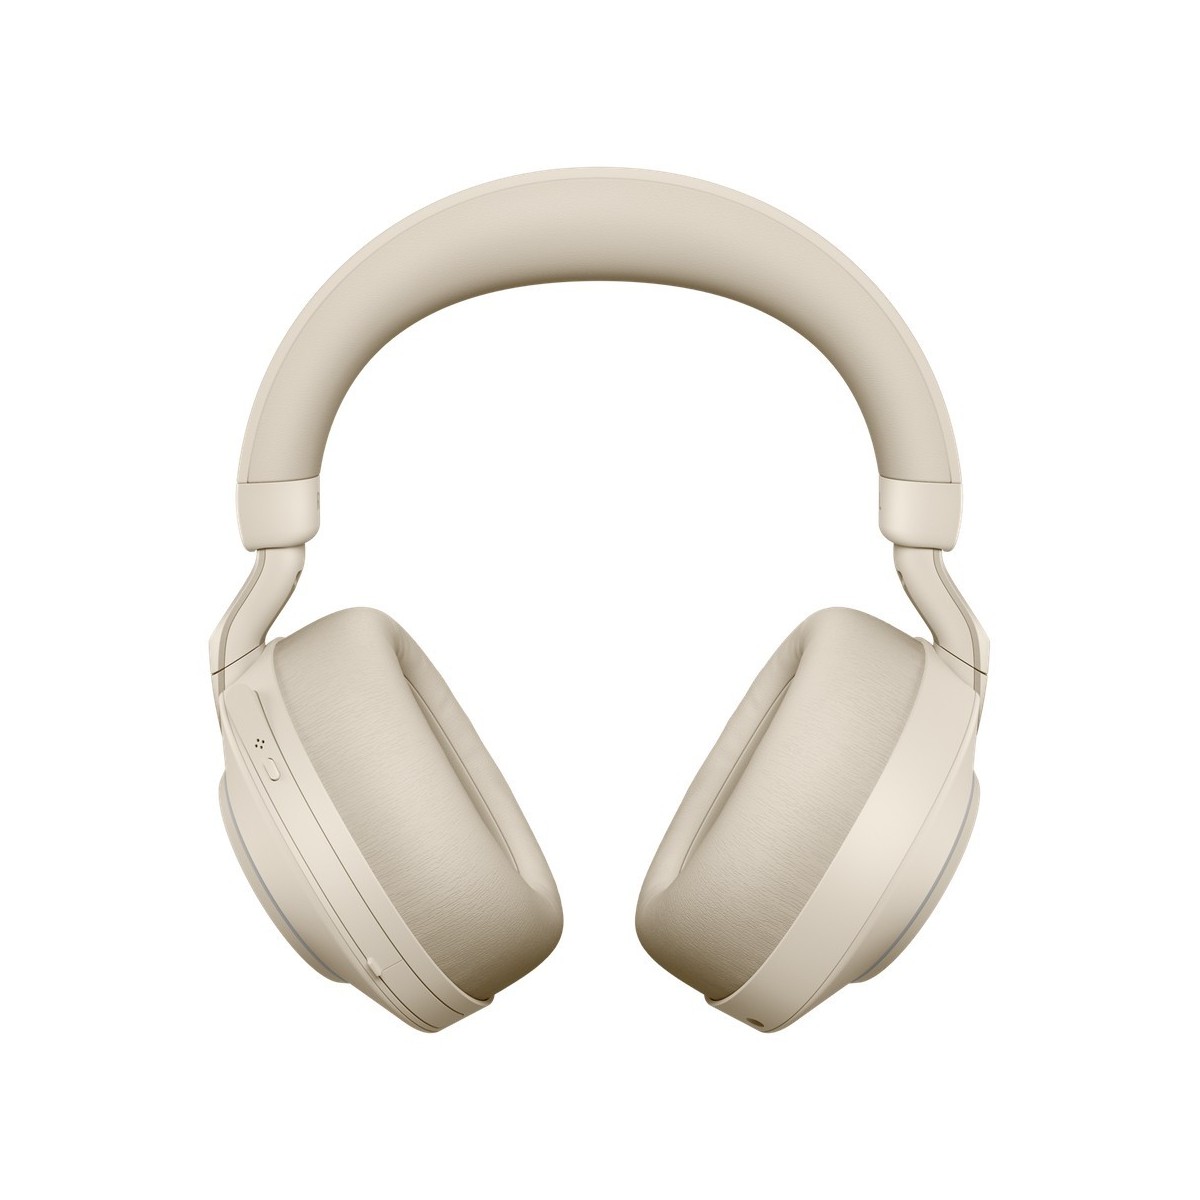 Jabra Evolve2 85 - MS Stereo - Headset - Head-band - Office/Call center - Beige - Binaural - Bluetooth pairing,Play/pause,Track 